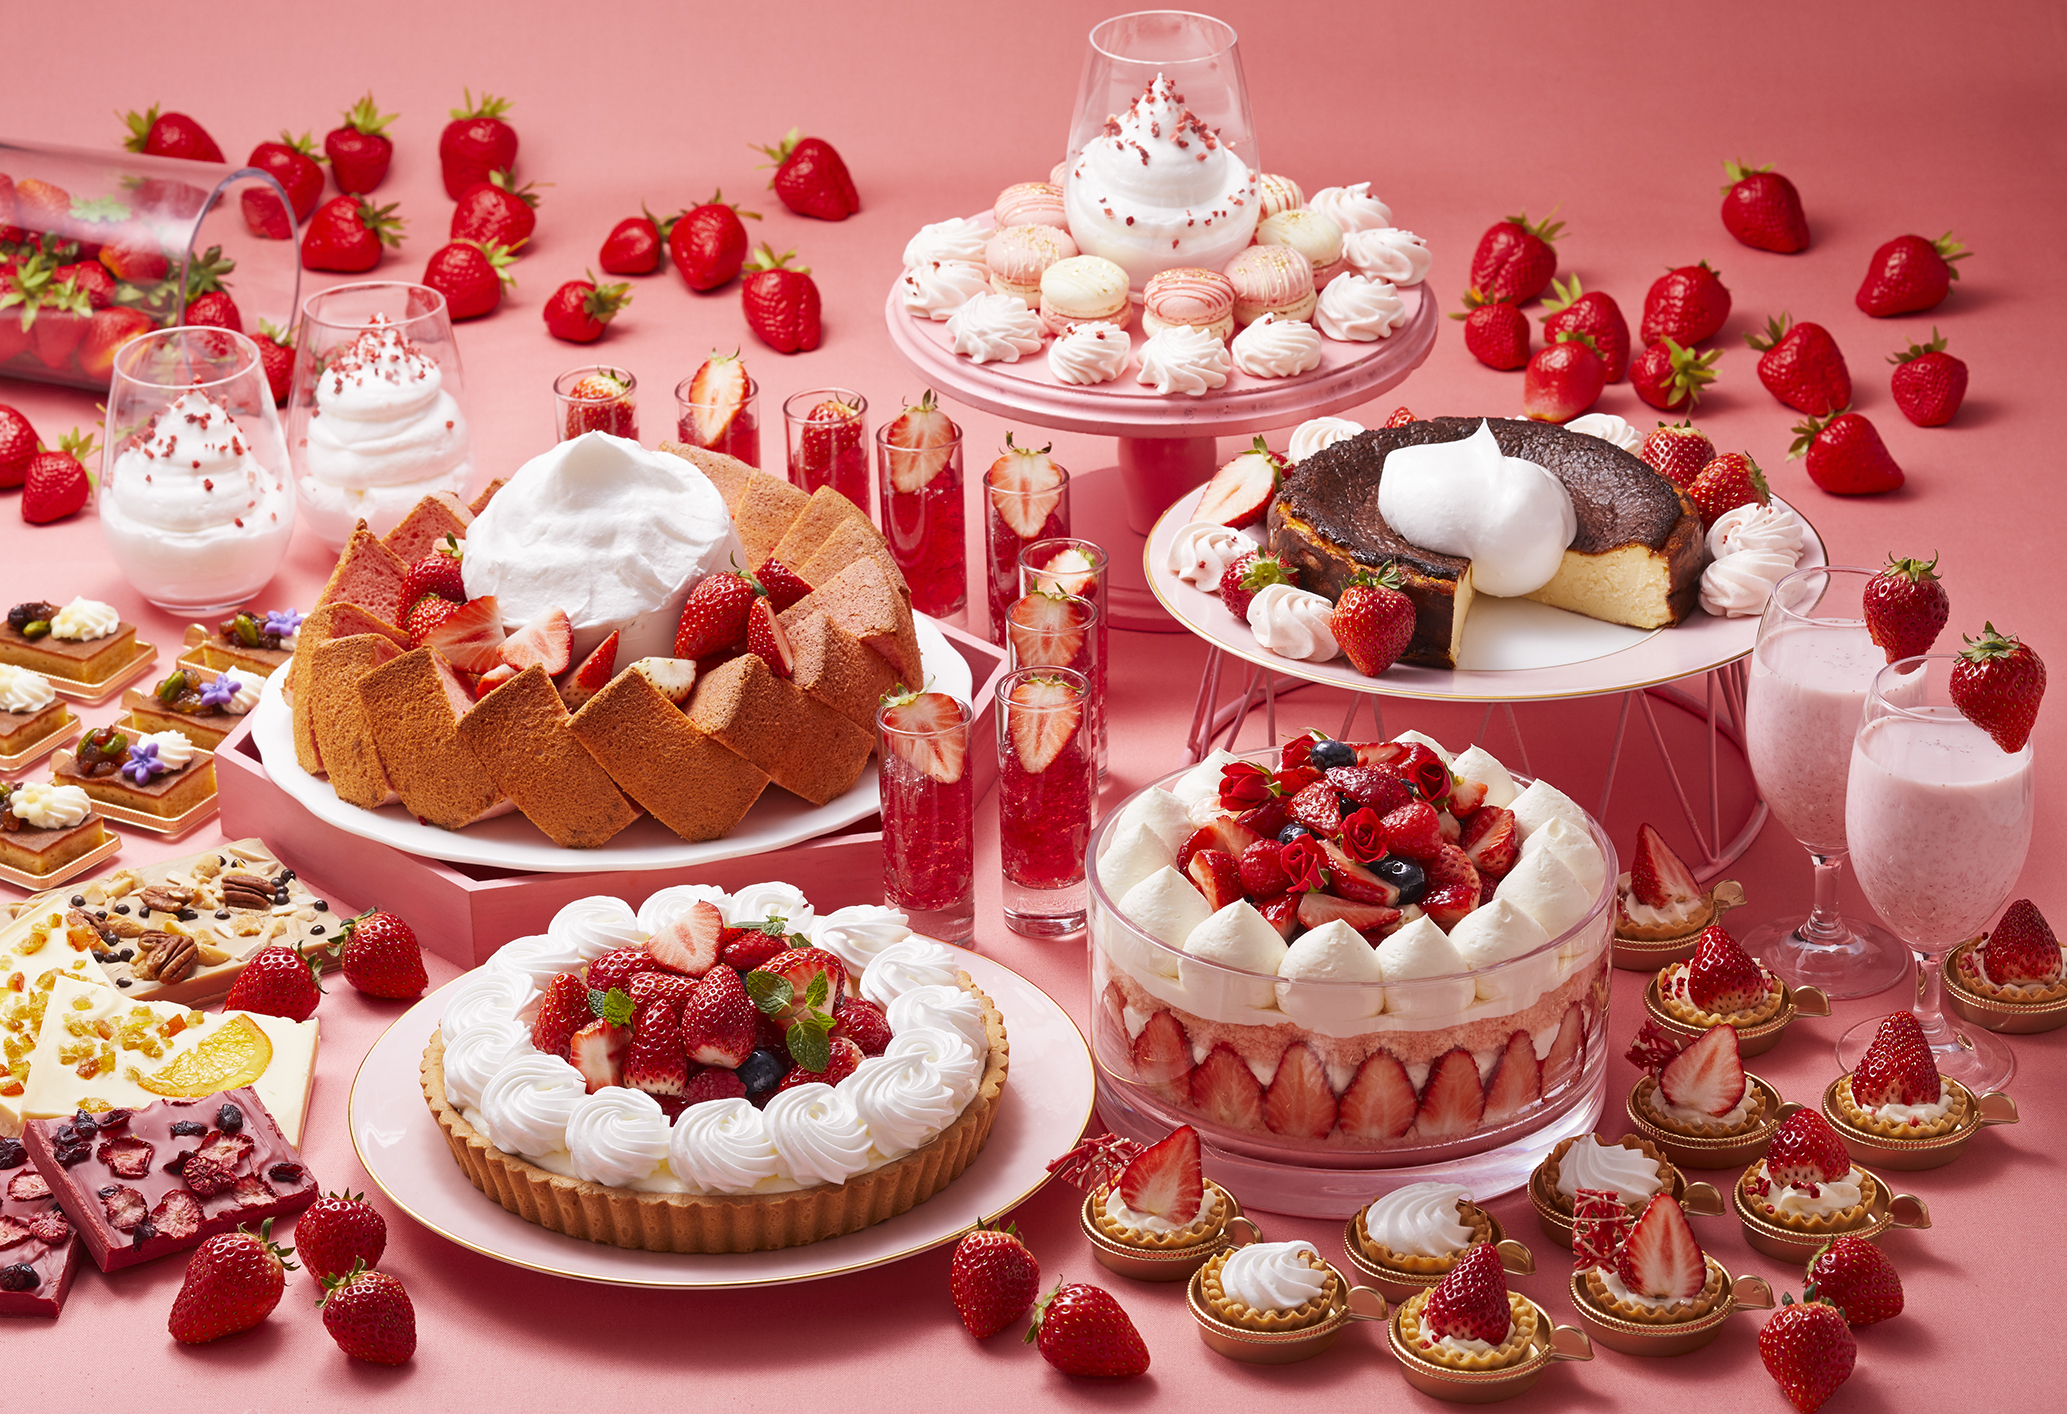 Keio Plaza Hotel Tokyo Offers Strawberry Dessert Buffet Implementing